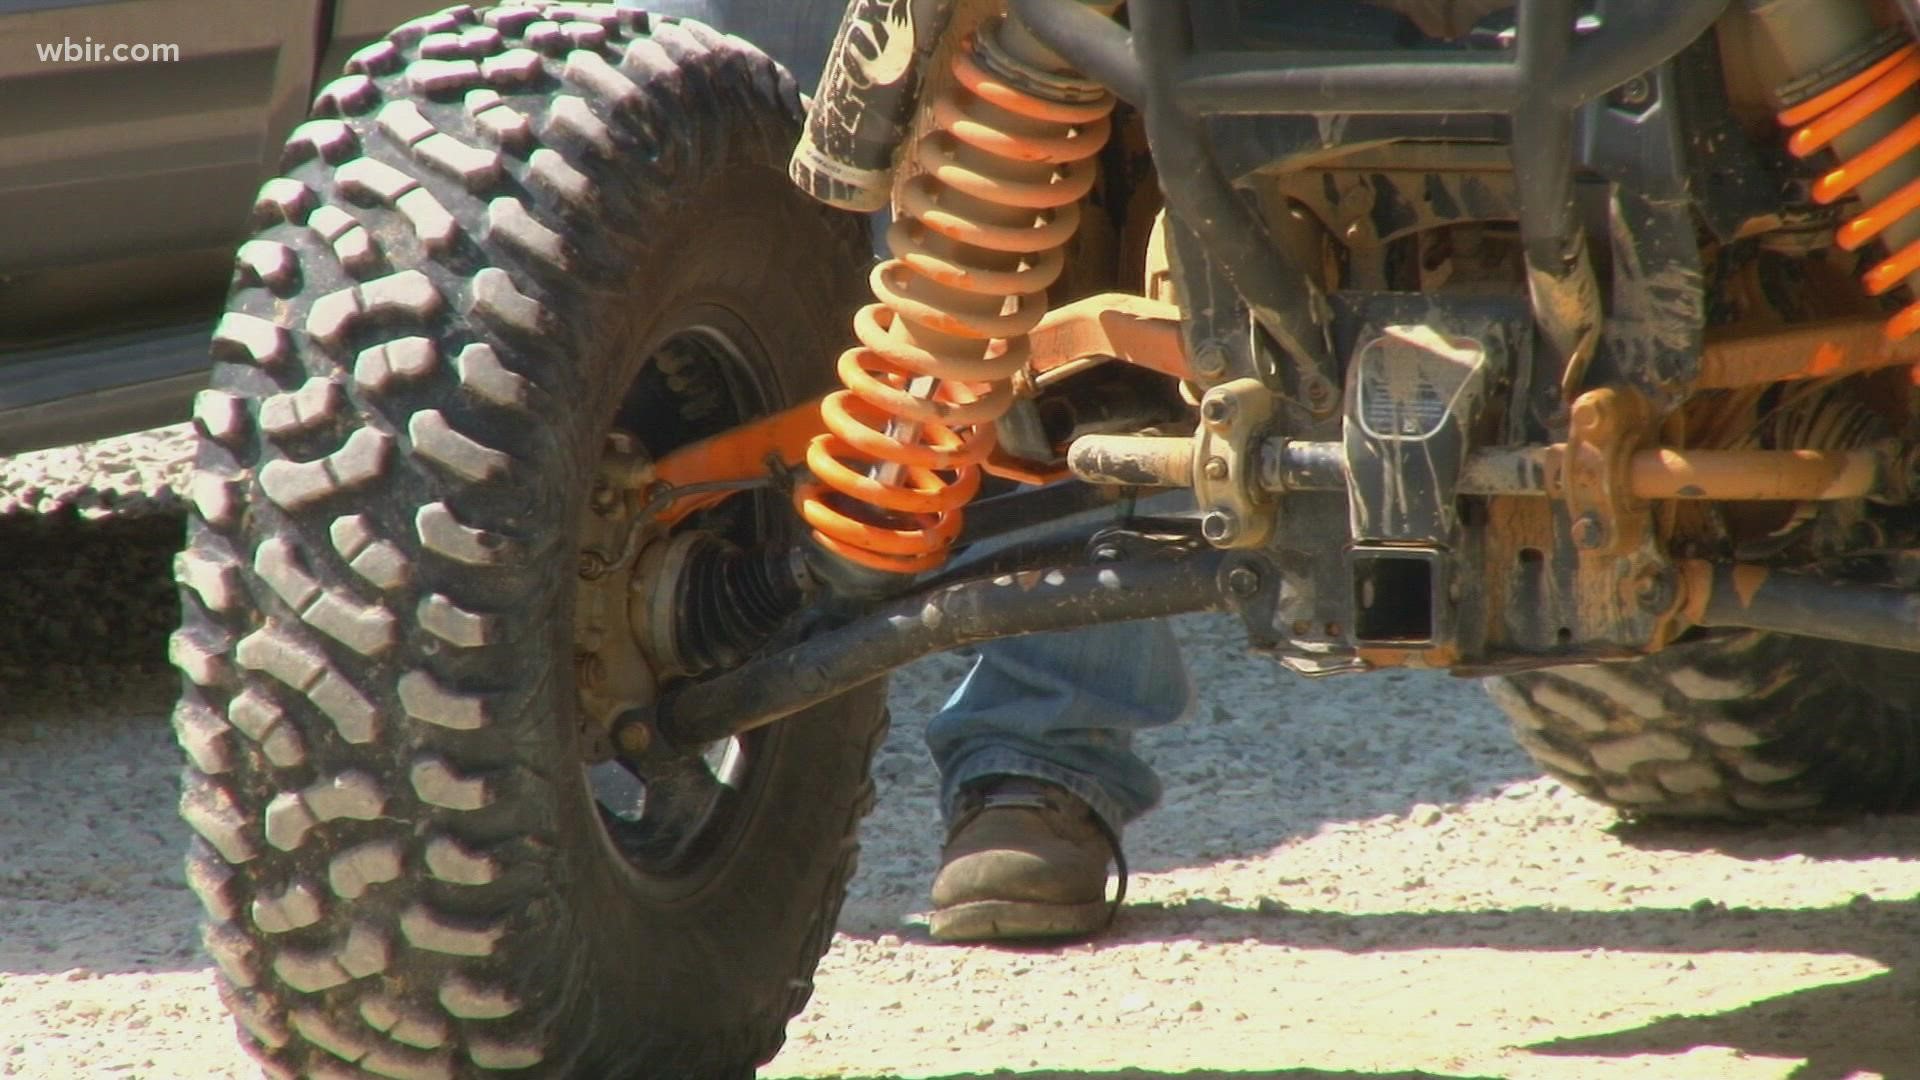 The Tennessee Highway Patrol says six people in just one region of our area have died in ATV crashes this year.